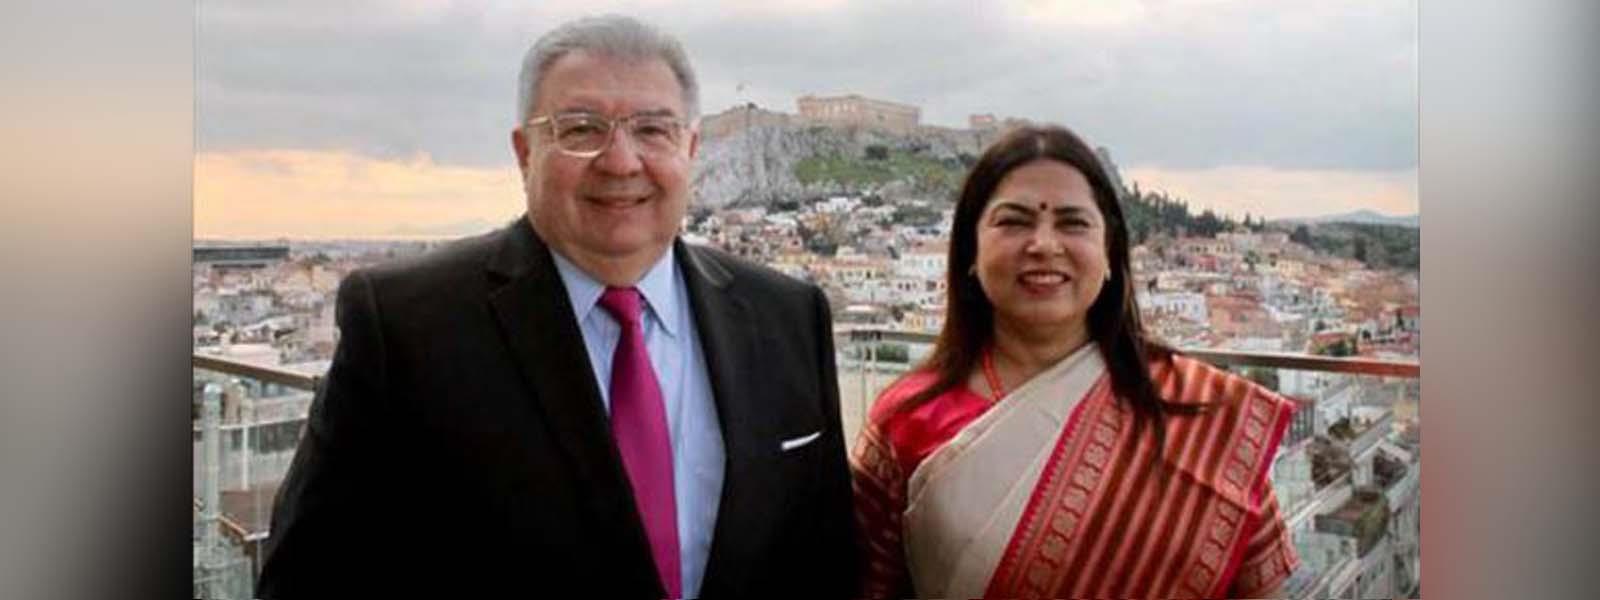 Minister of State for External Affairs, Smt. Meenakashi Lekhi met H. E. Professor John Chrysoulakis, Secretary General for Greeks Abroad & Public Diplomacy of Ministry of Foreign Affairs of Greece in Athens